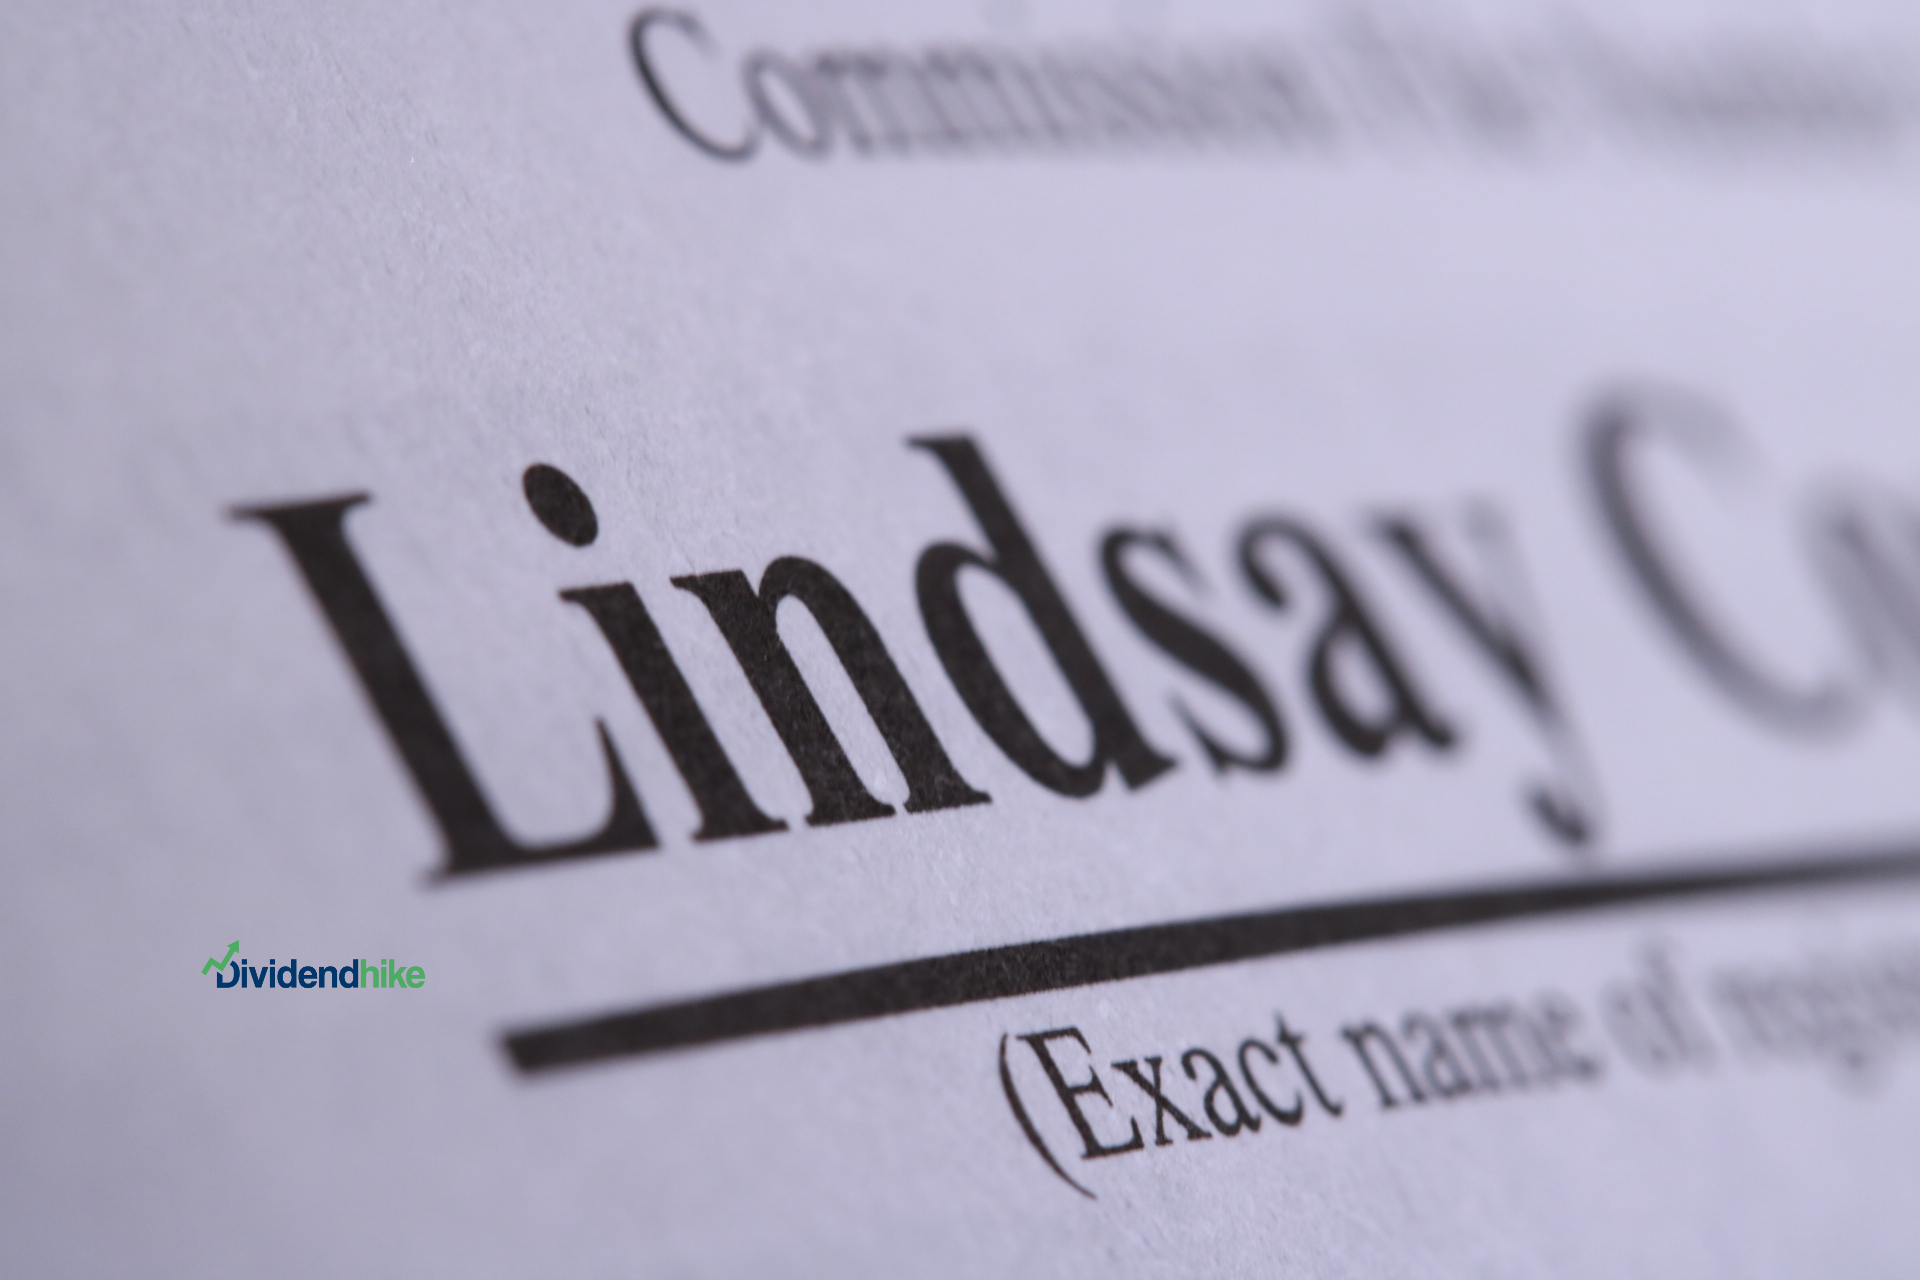 Lindsay hikes dividend by 3.8%